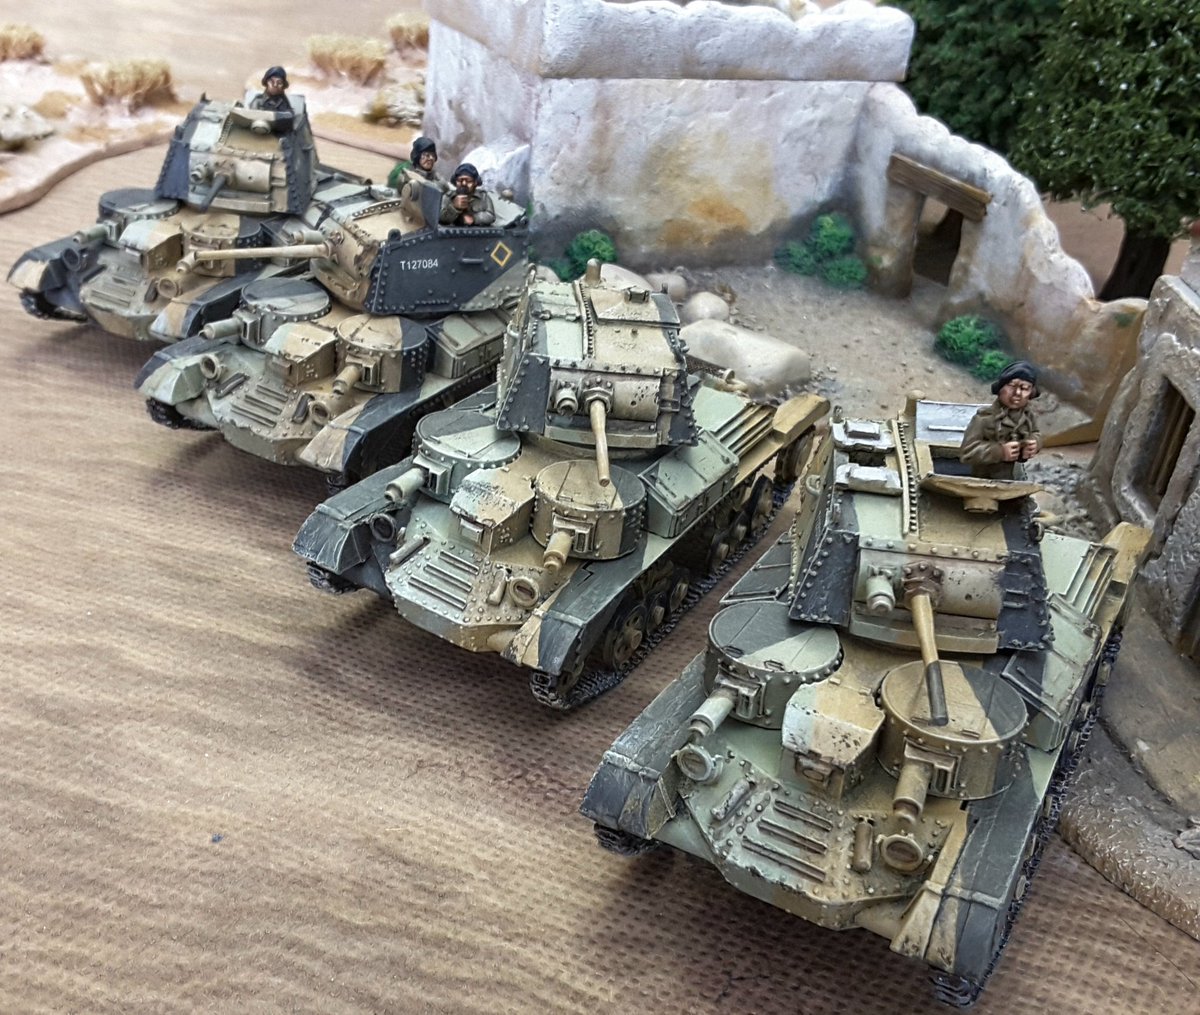 #ww2 A9 Cruiser #Tanks today. A completely mad design with paper thin armour but they do look great. #28mm @warlordgames models #wargames #wargaming #Miniatures #history